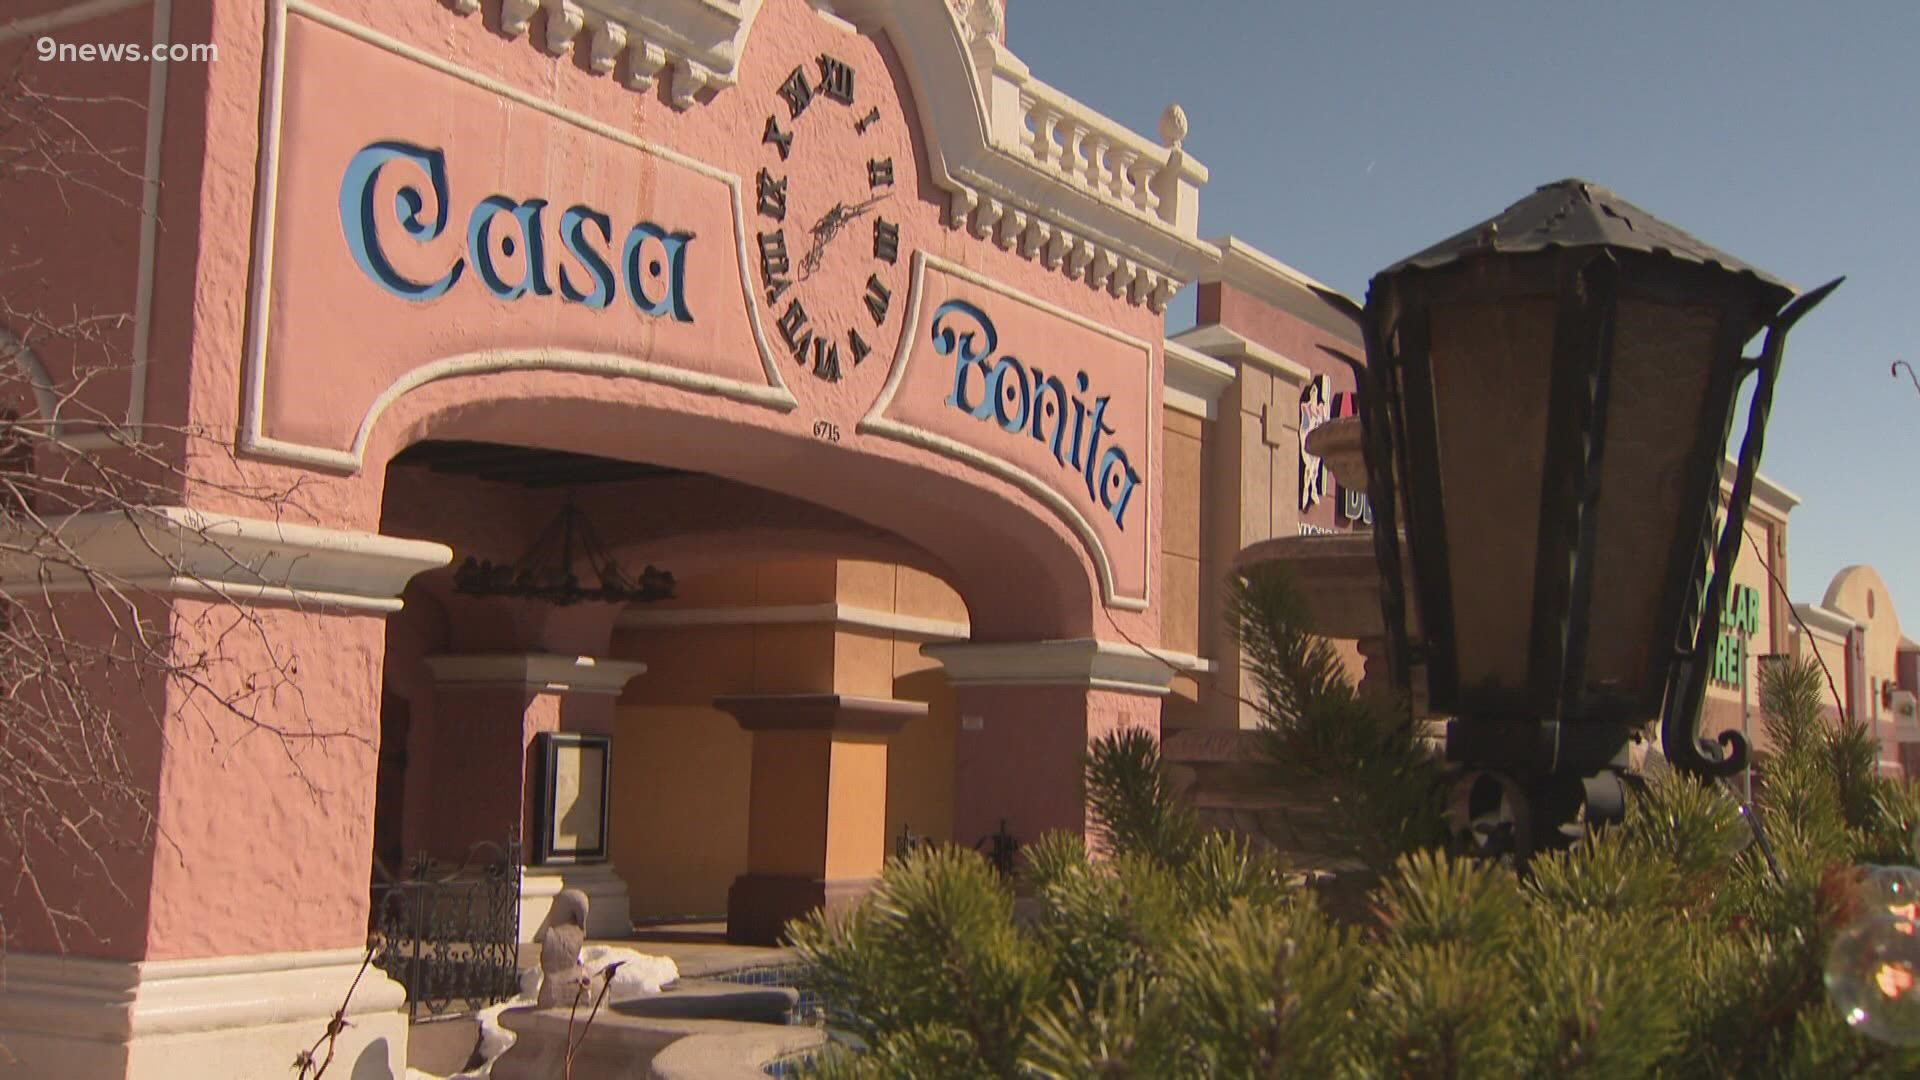 The leader of Save Casa Bonita filed the objection Monday in U.S. Bankruptcy Court.